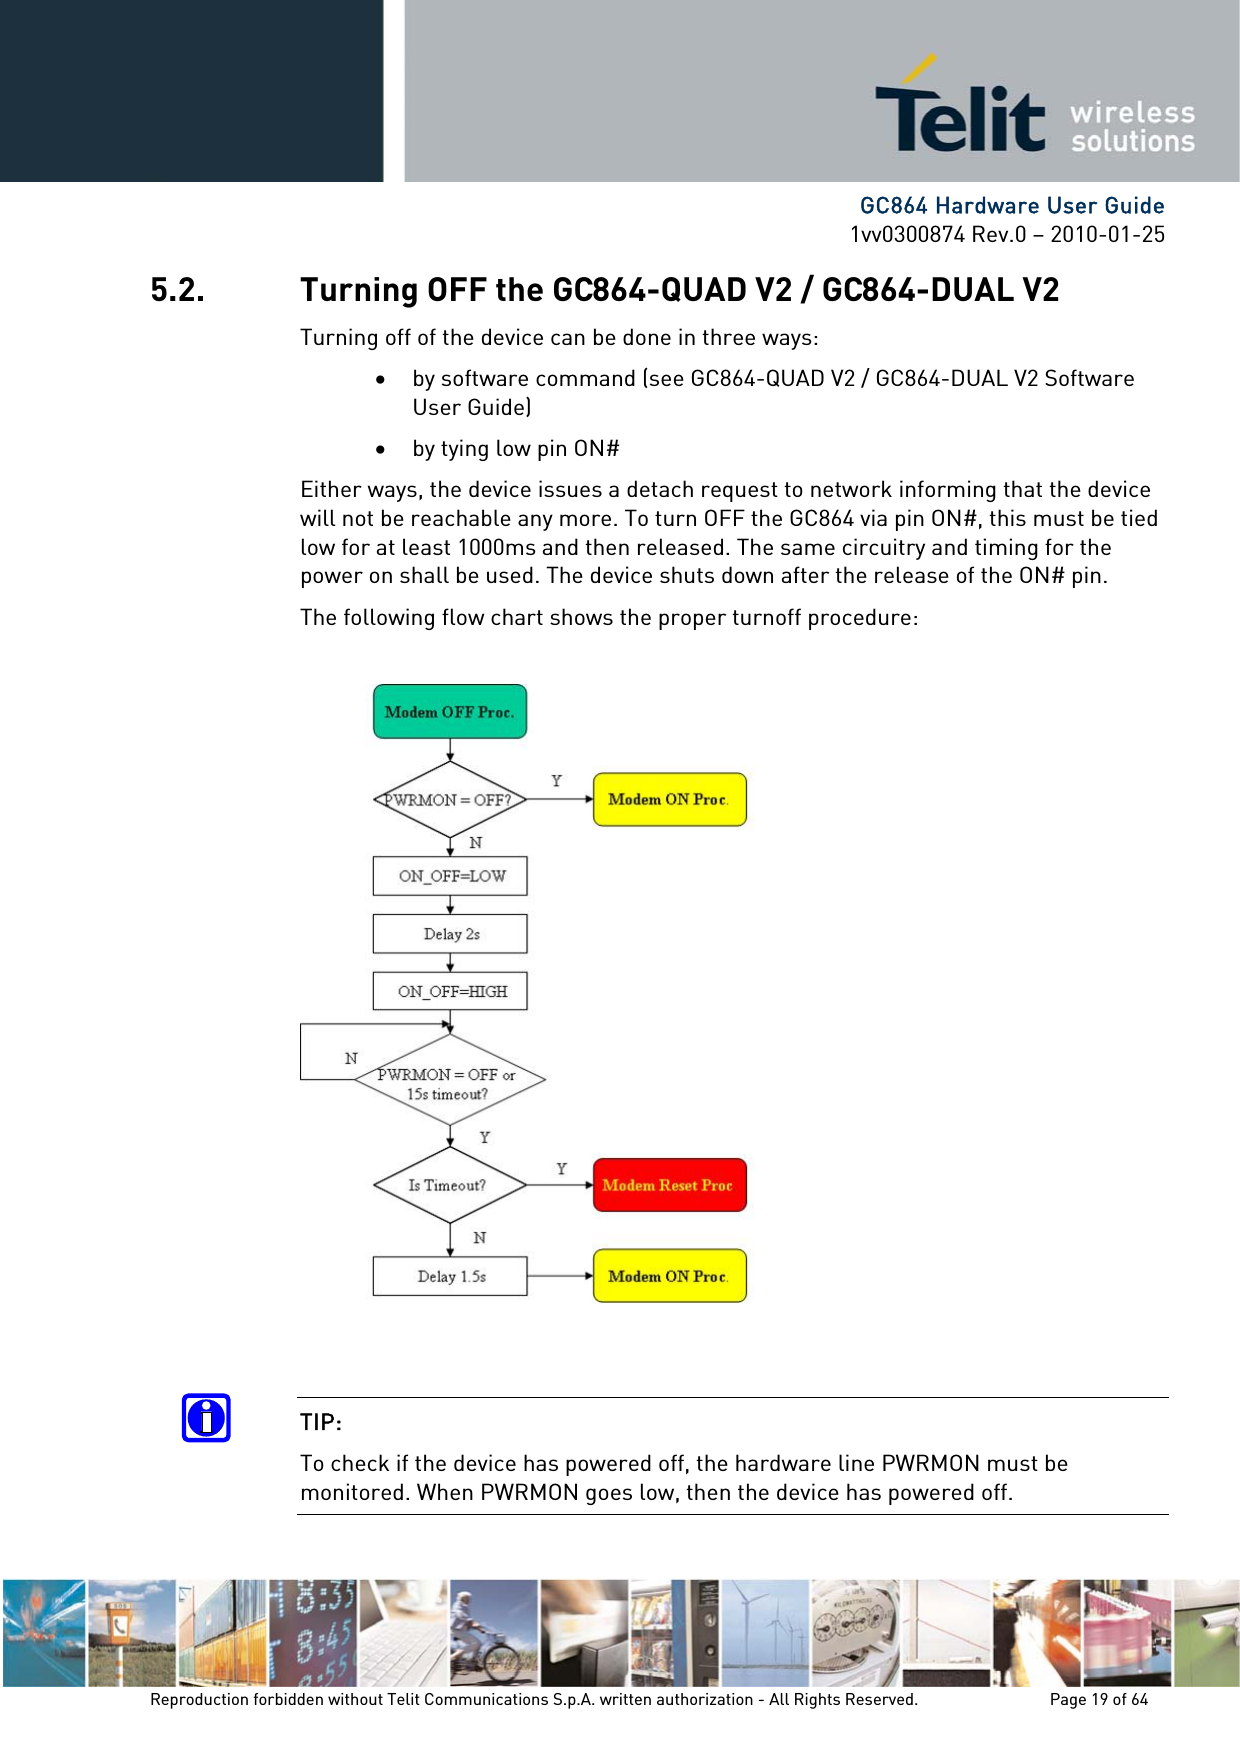      GC864 Hardware User Guide 1vv0300874 Rev.0 – 2010-01-25 Reproduction forbidden without Telit Communications S.p.A. written authorization - All Rights Reserved.    Page 19 of 64  5.2. Turning OFF the GC864-QUAD V2 / GC864-DUAL V2 Turning off of the device can be done in three ways: • by software command (see GC864-QUAD V2 / GC864-DUAL V2 Software User Guide) • by tying low pin ON# Either ways, the device issues a detach request to network informing that the device will not be reachable any more. To turn OFF the GC864 via pin ON#, this must be tied low for at least 1000ms and then released. The same circuitry and timing for the power on shall be used. The device shuts down after the release of the ON# pin. The following flow chart shows the proper turnoff procedure:     TIP:  To check if the device has powered off, the hardware line PWRMON must be monitored. When PWRMON goes low, then the device has powered off. 